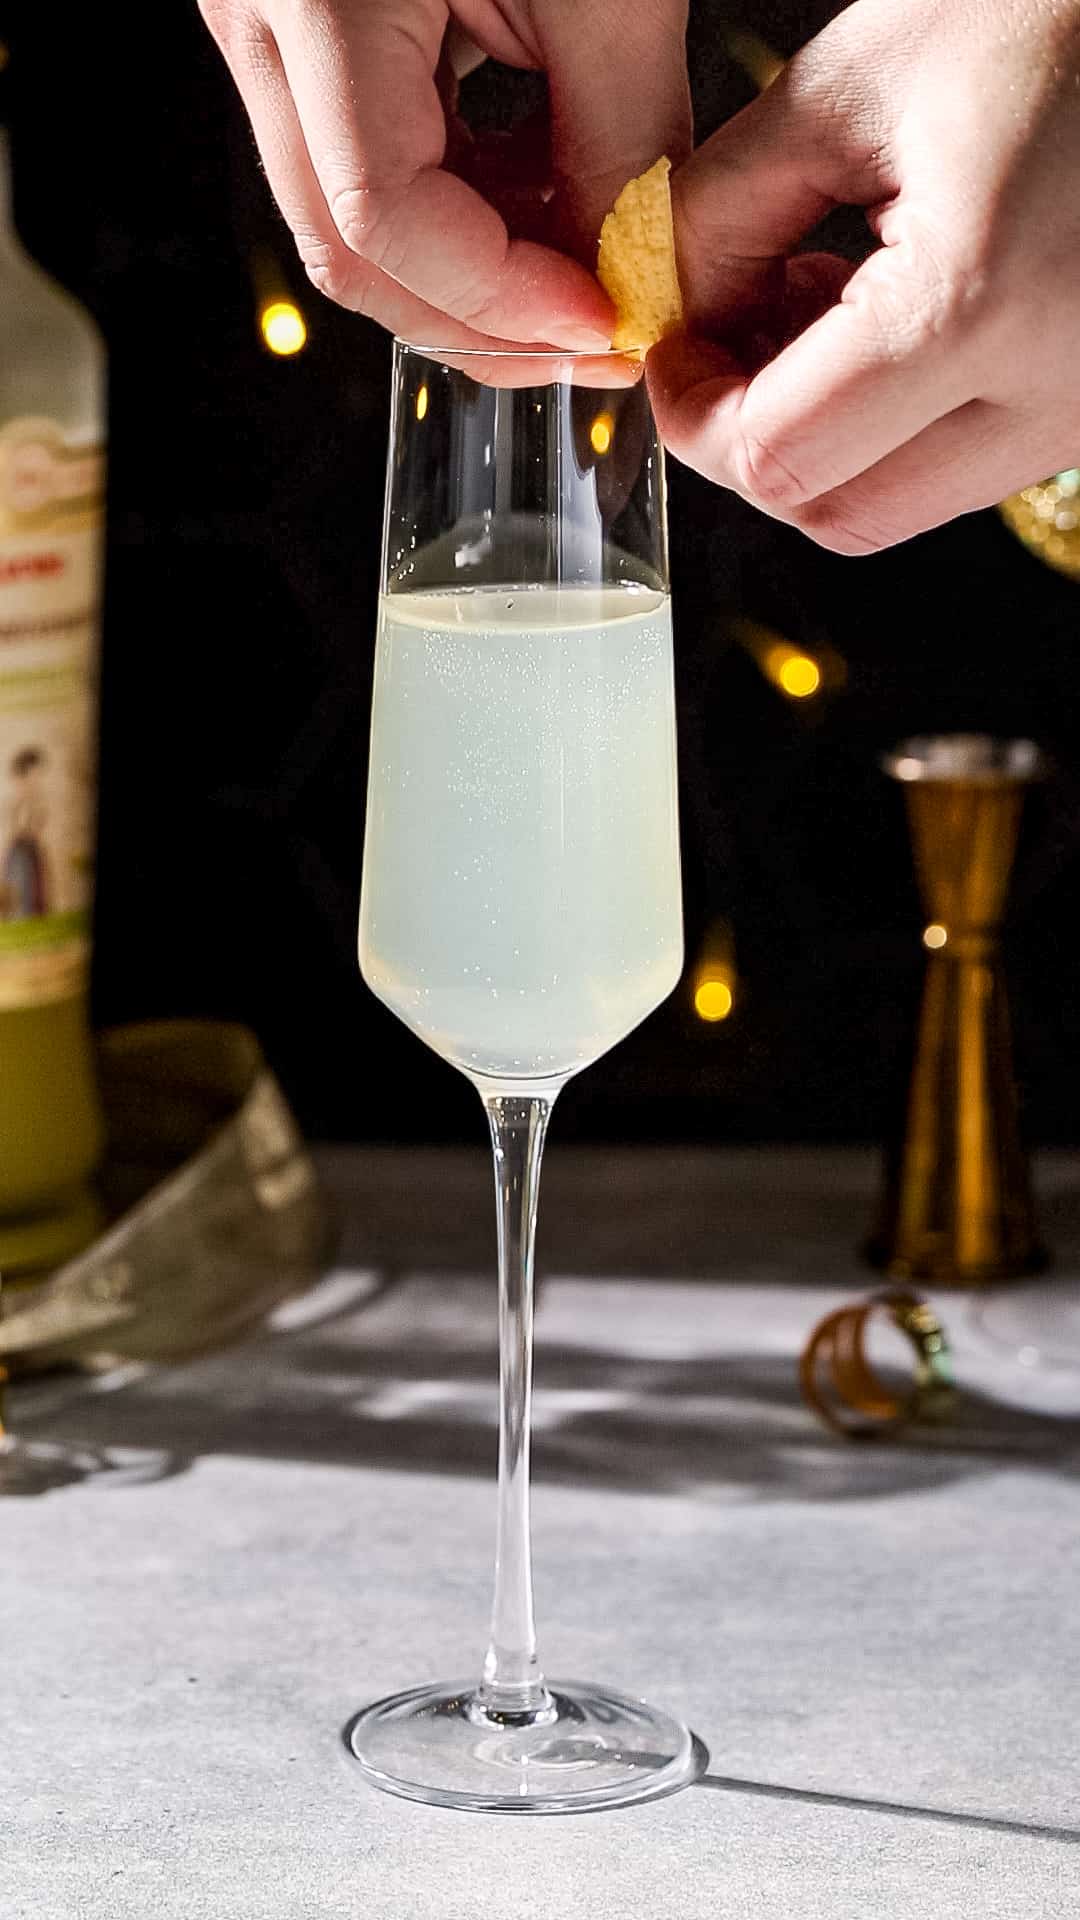 Hands adding a lemon peel twist garnish to the rim of a Champagne flute filled with sparkling yellow liquid.